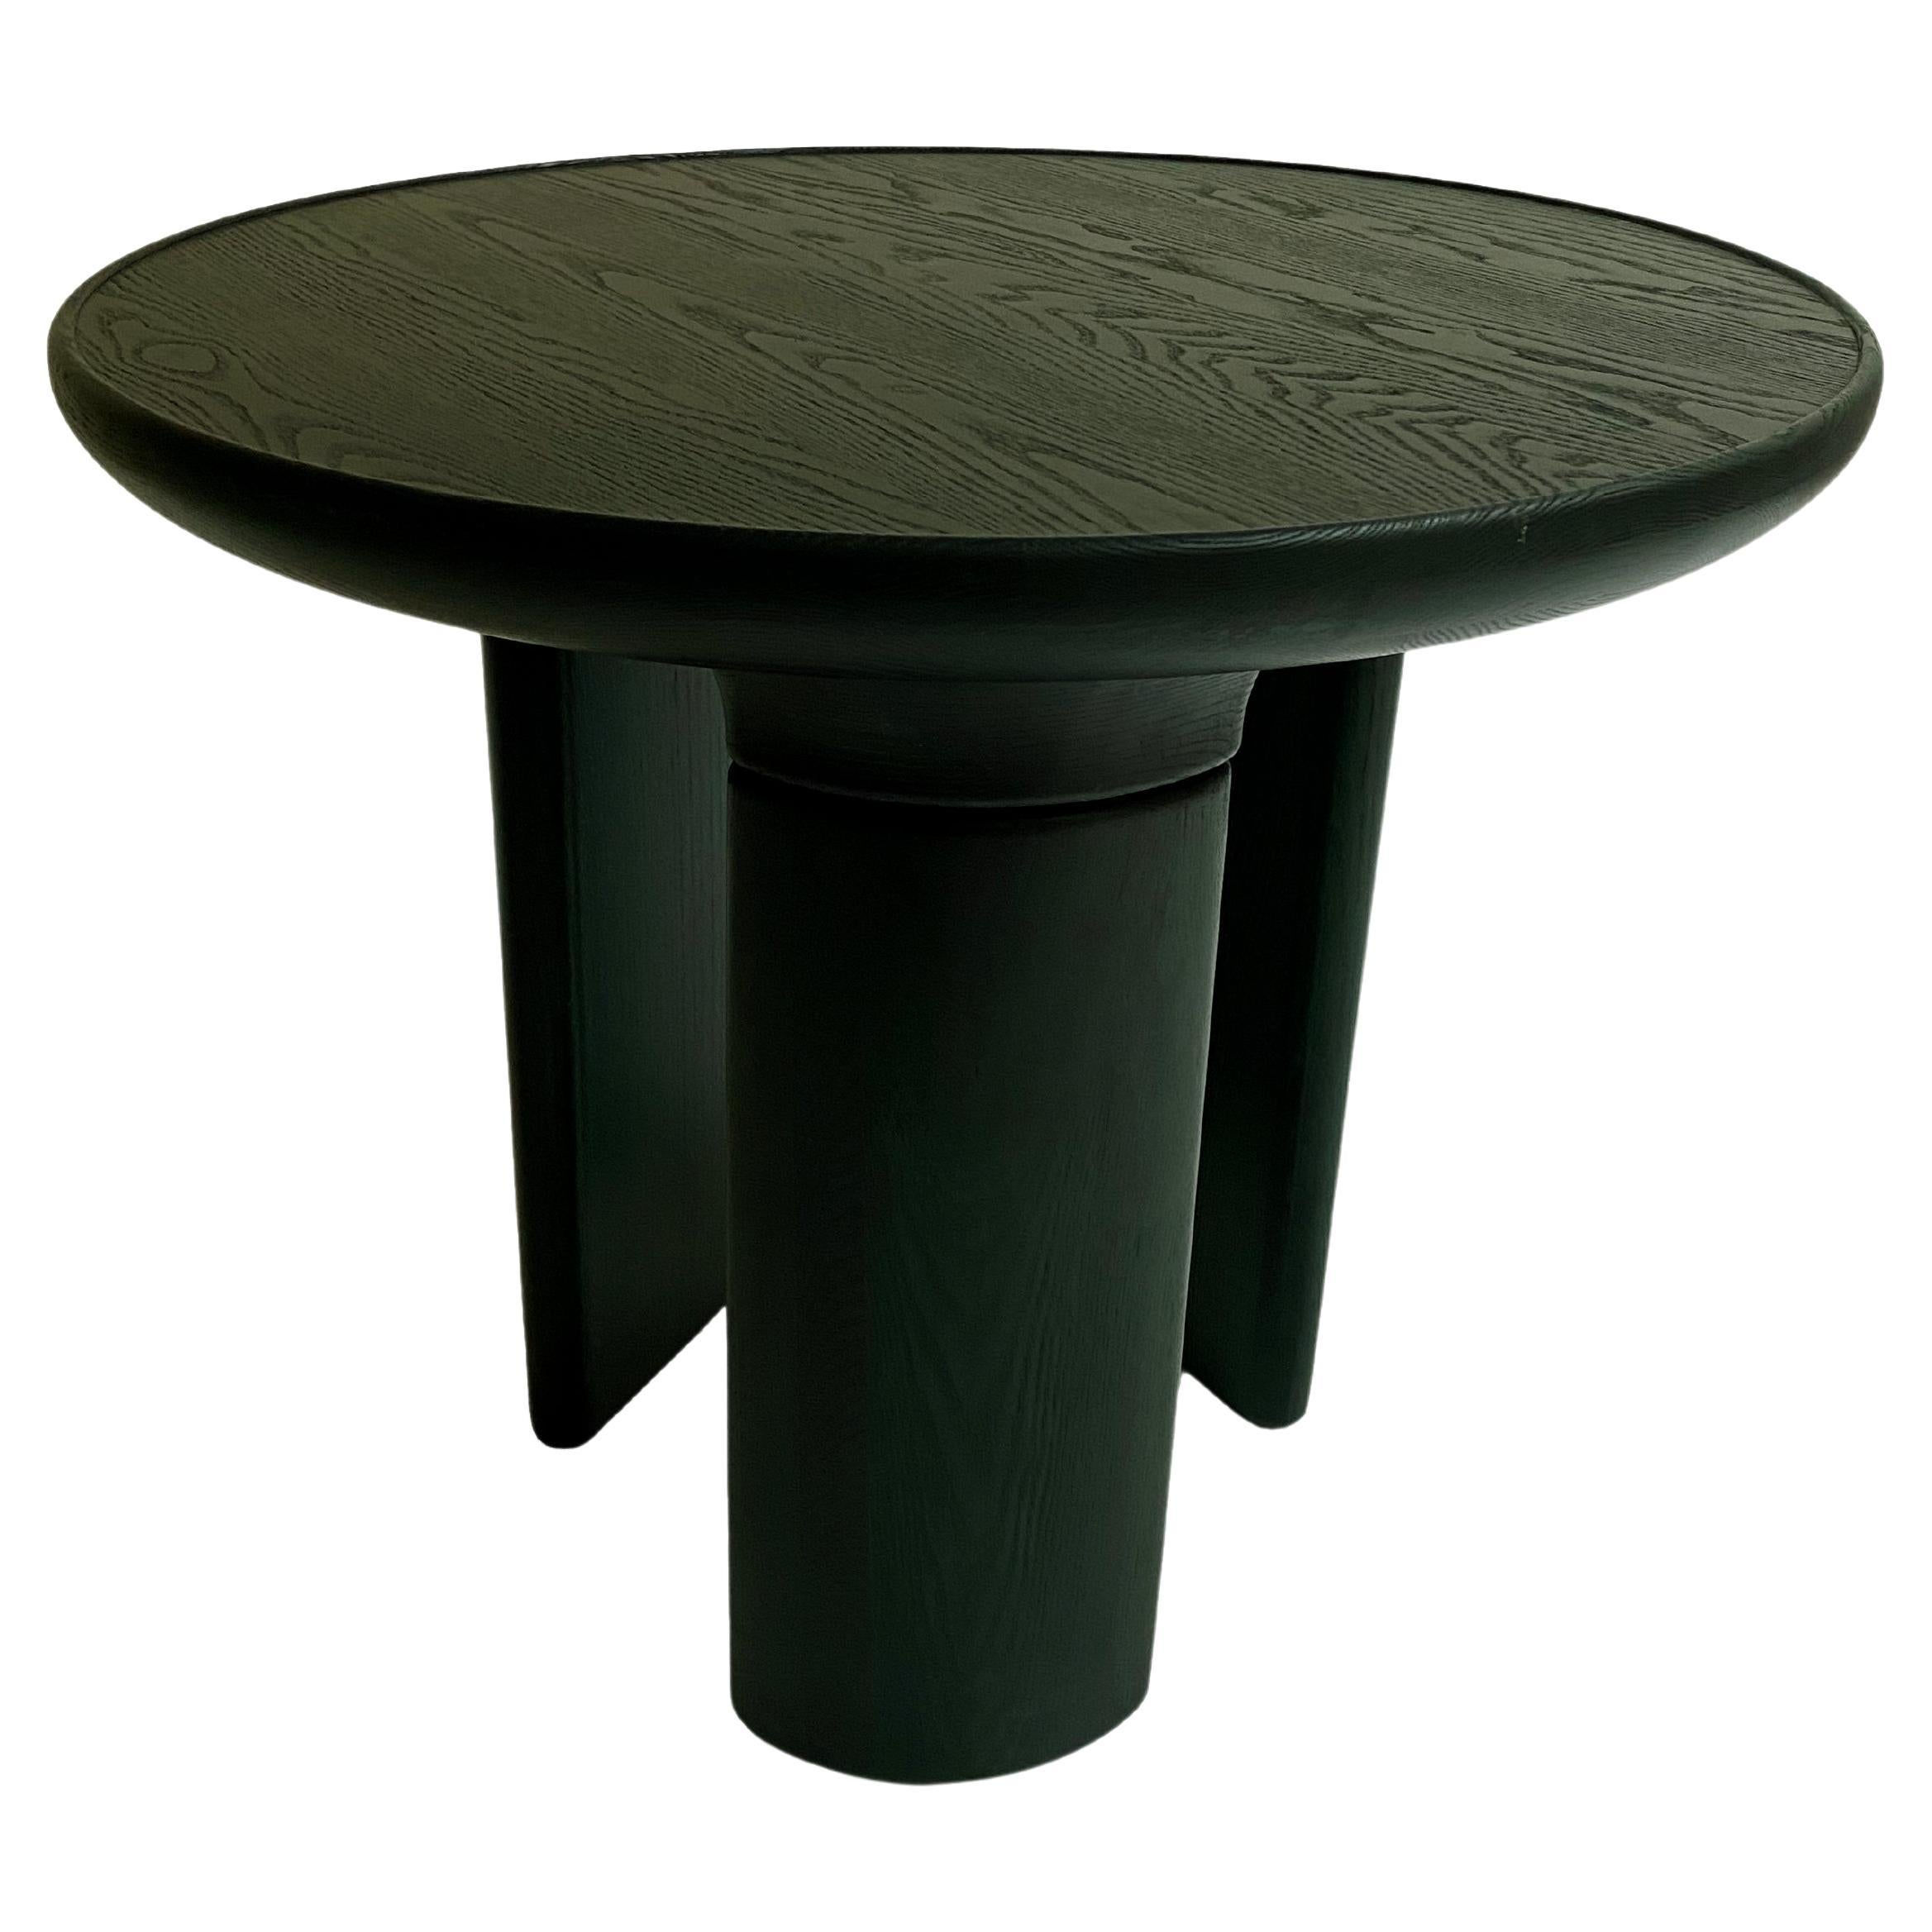 English Green Stained Daiku Coffee Table by Victoria Magniant For Sale